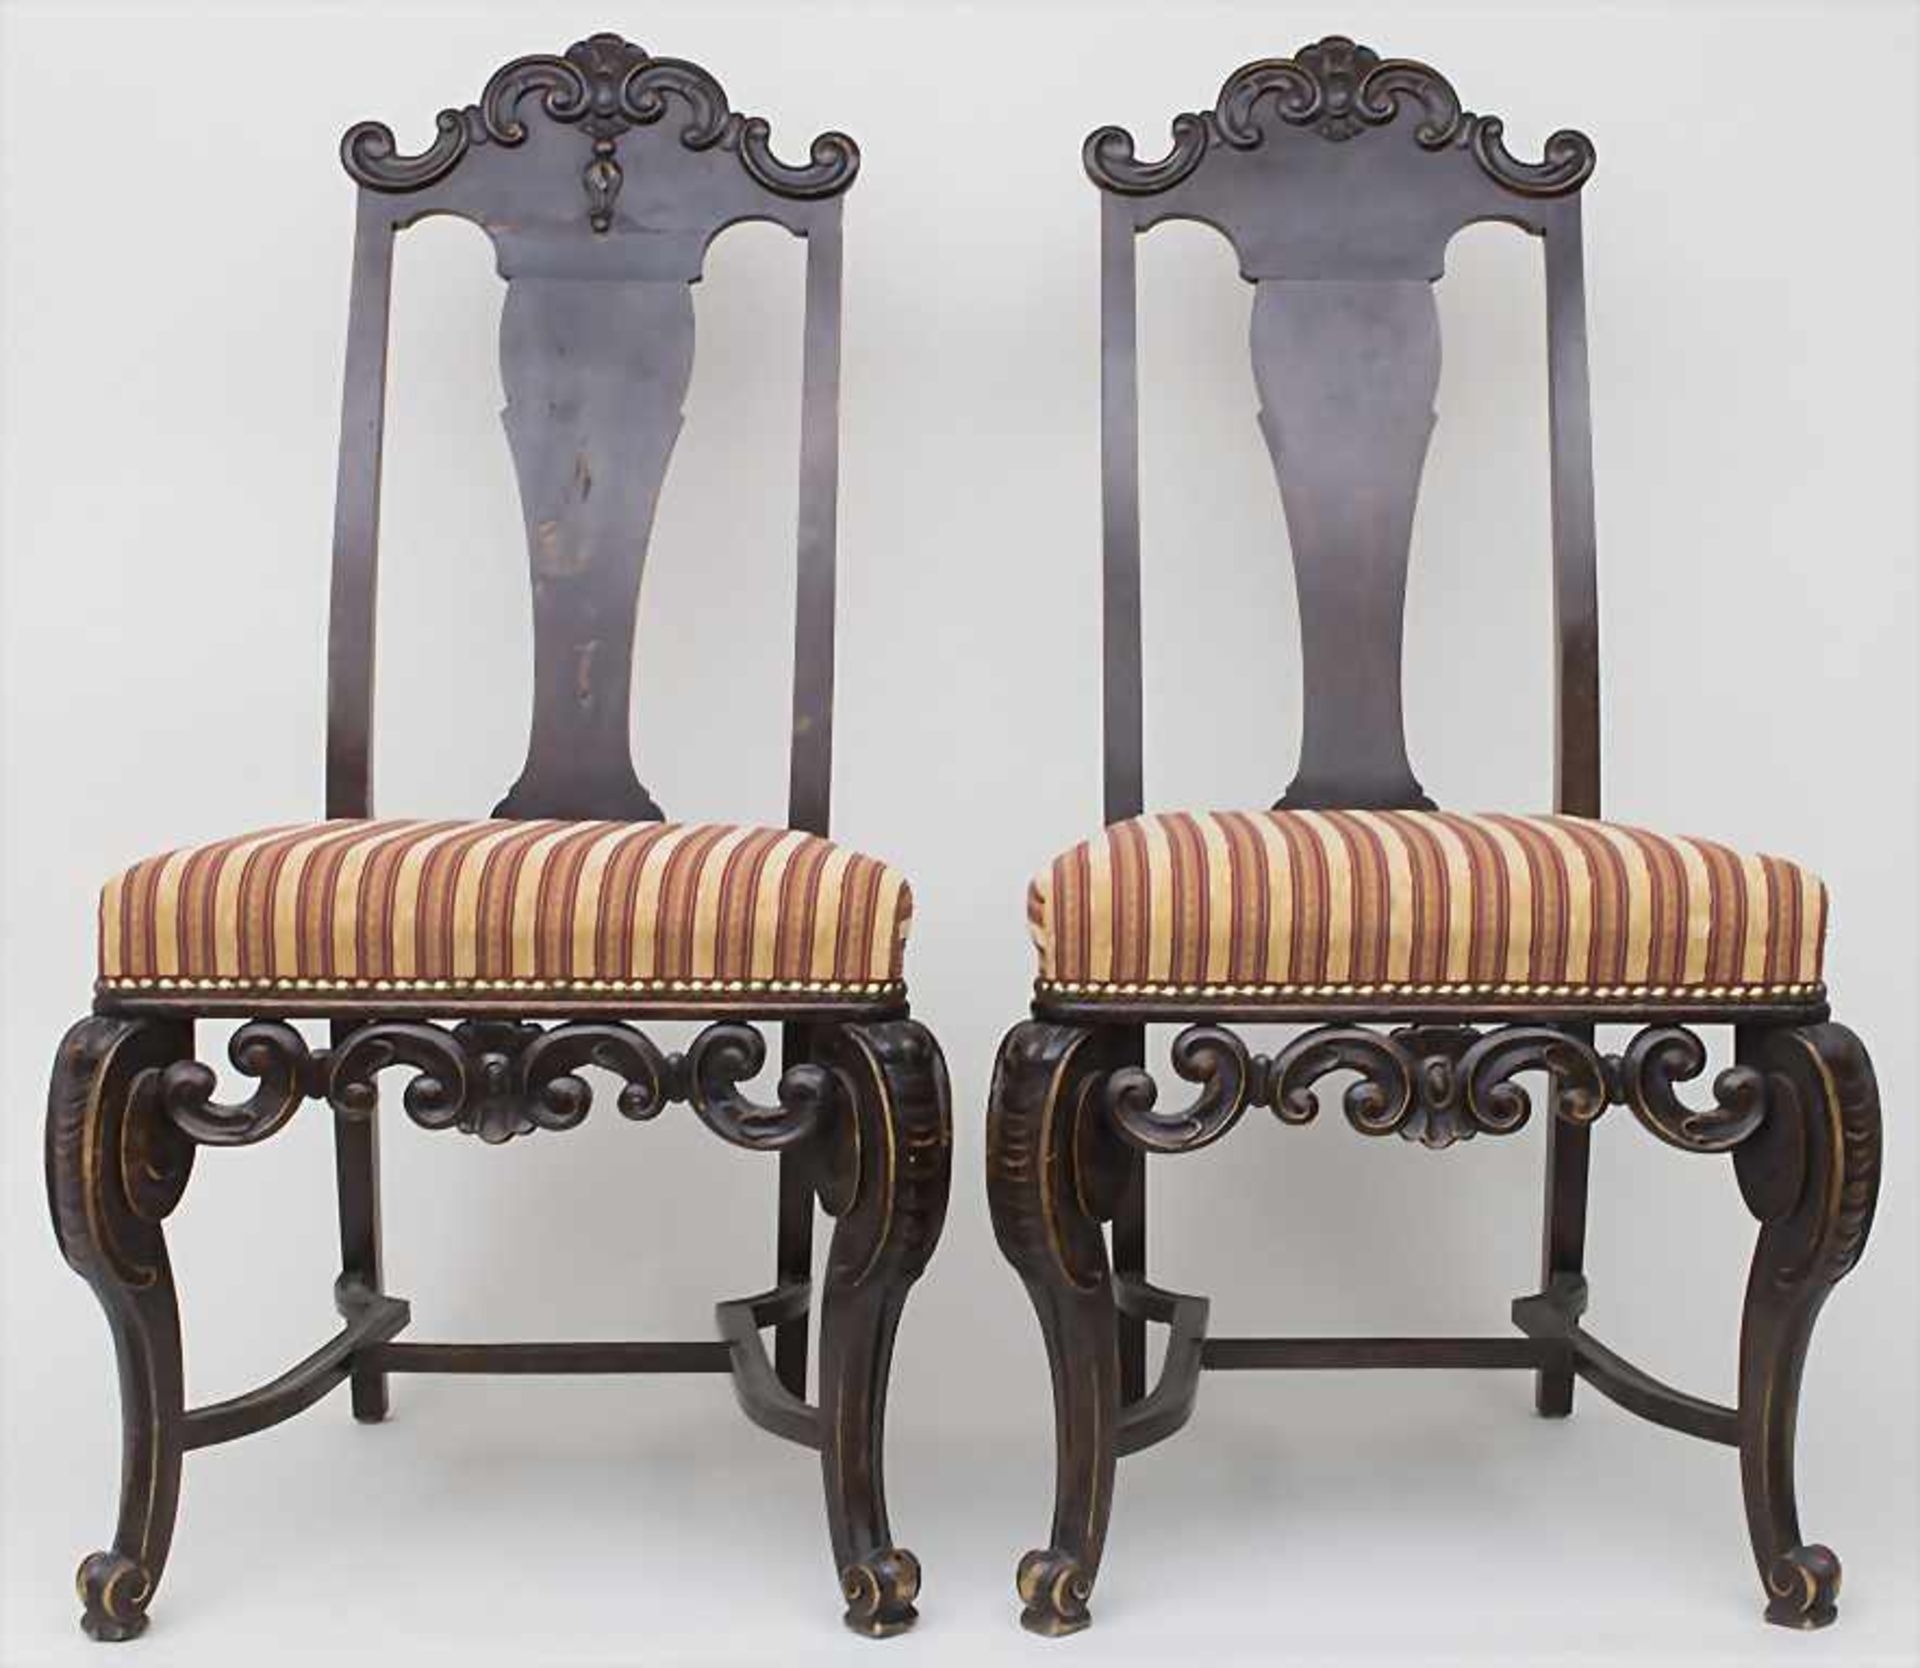 Paar Historismus-Stühle / A pair of historism chairs, 19. Jh.<